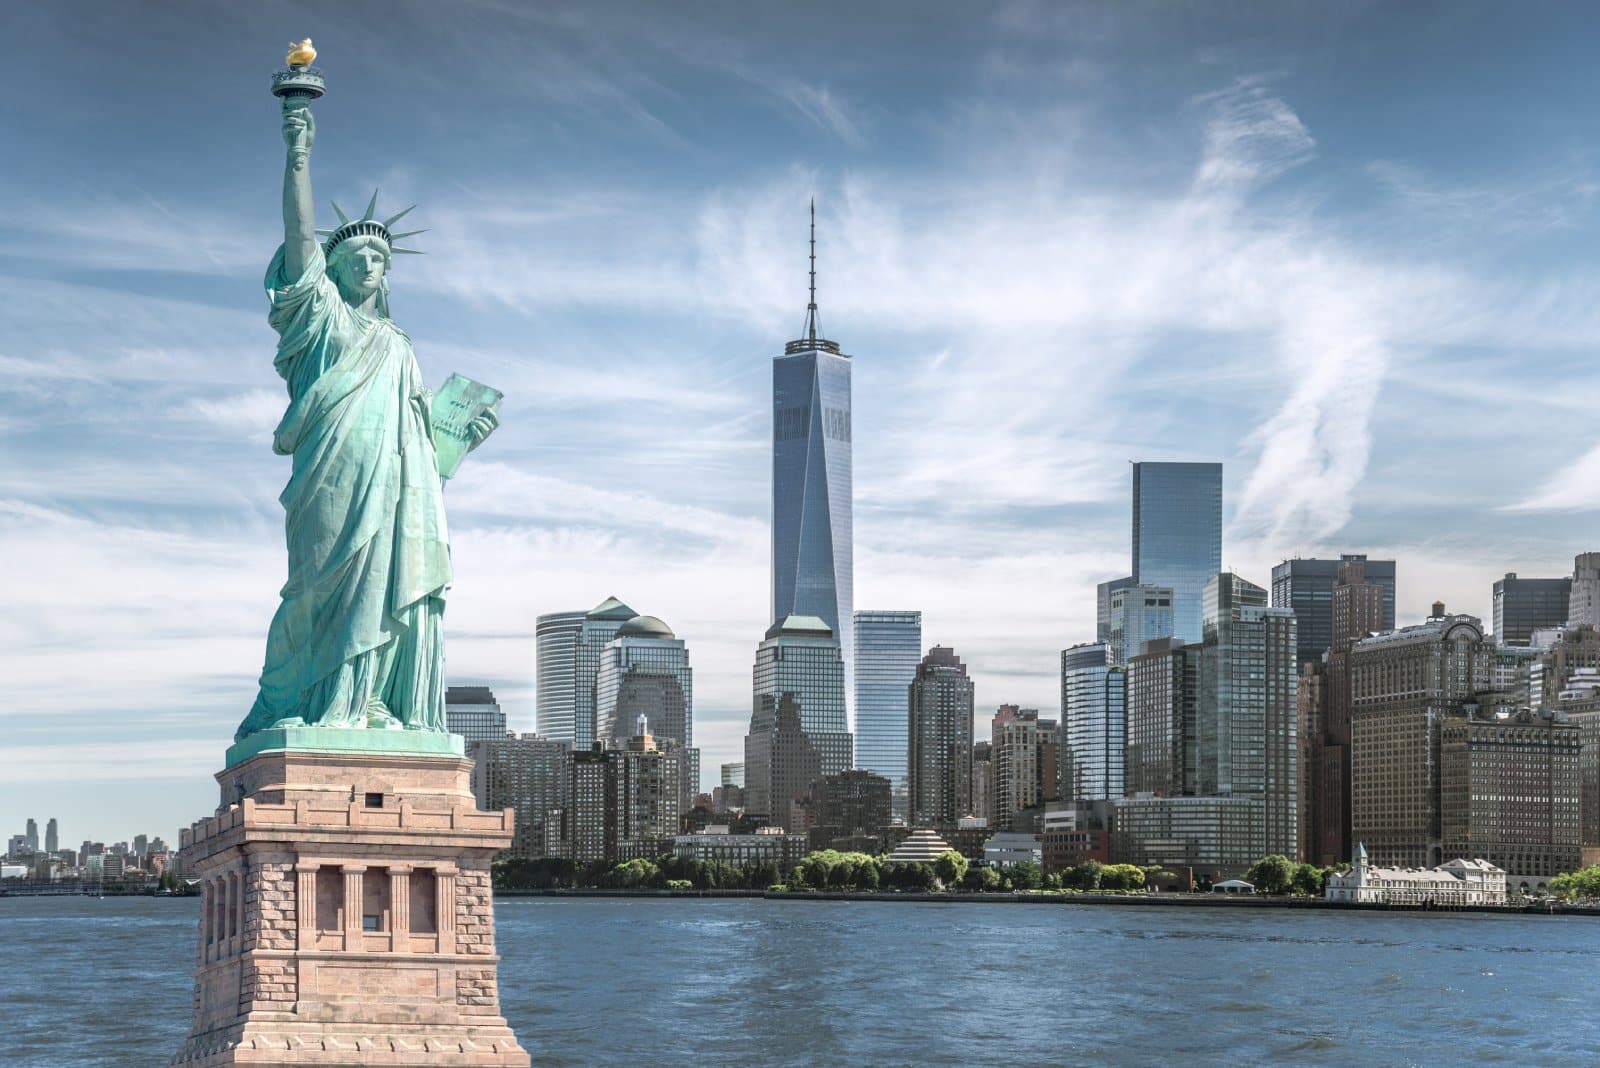 <p class="wp-caption-text">Image Credit: Shutterstock / spyarm</p>  <p><span>These cities paint a picture of America’s diverse landscape, rich history, and boundless energy. Whether your home state made the list or you’re curious about other destinations, there’s always more to explore in this vast and varied country. Pack your bags, and let the adventure begin!</span></p>